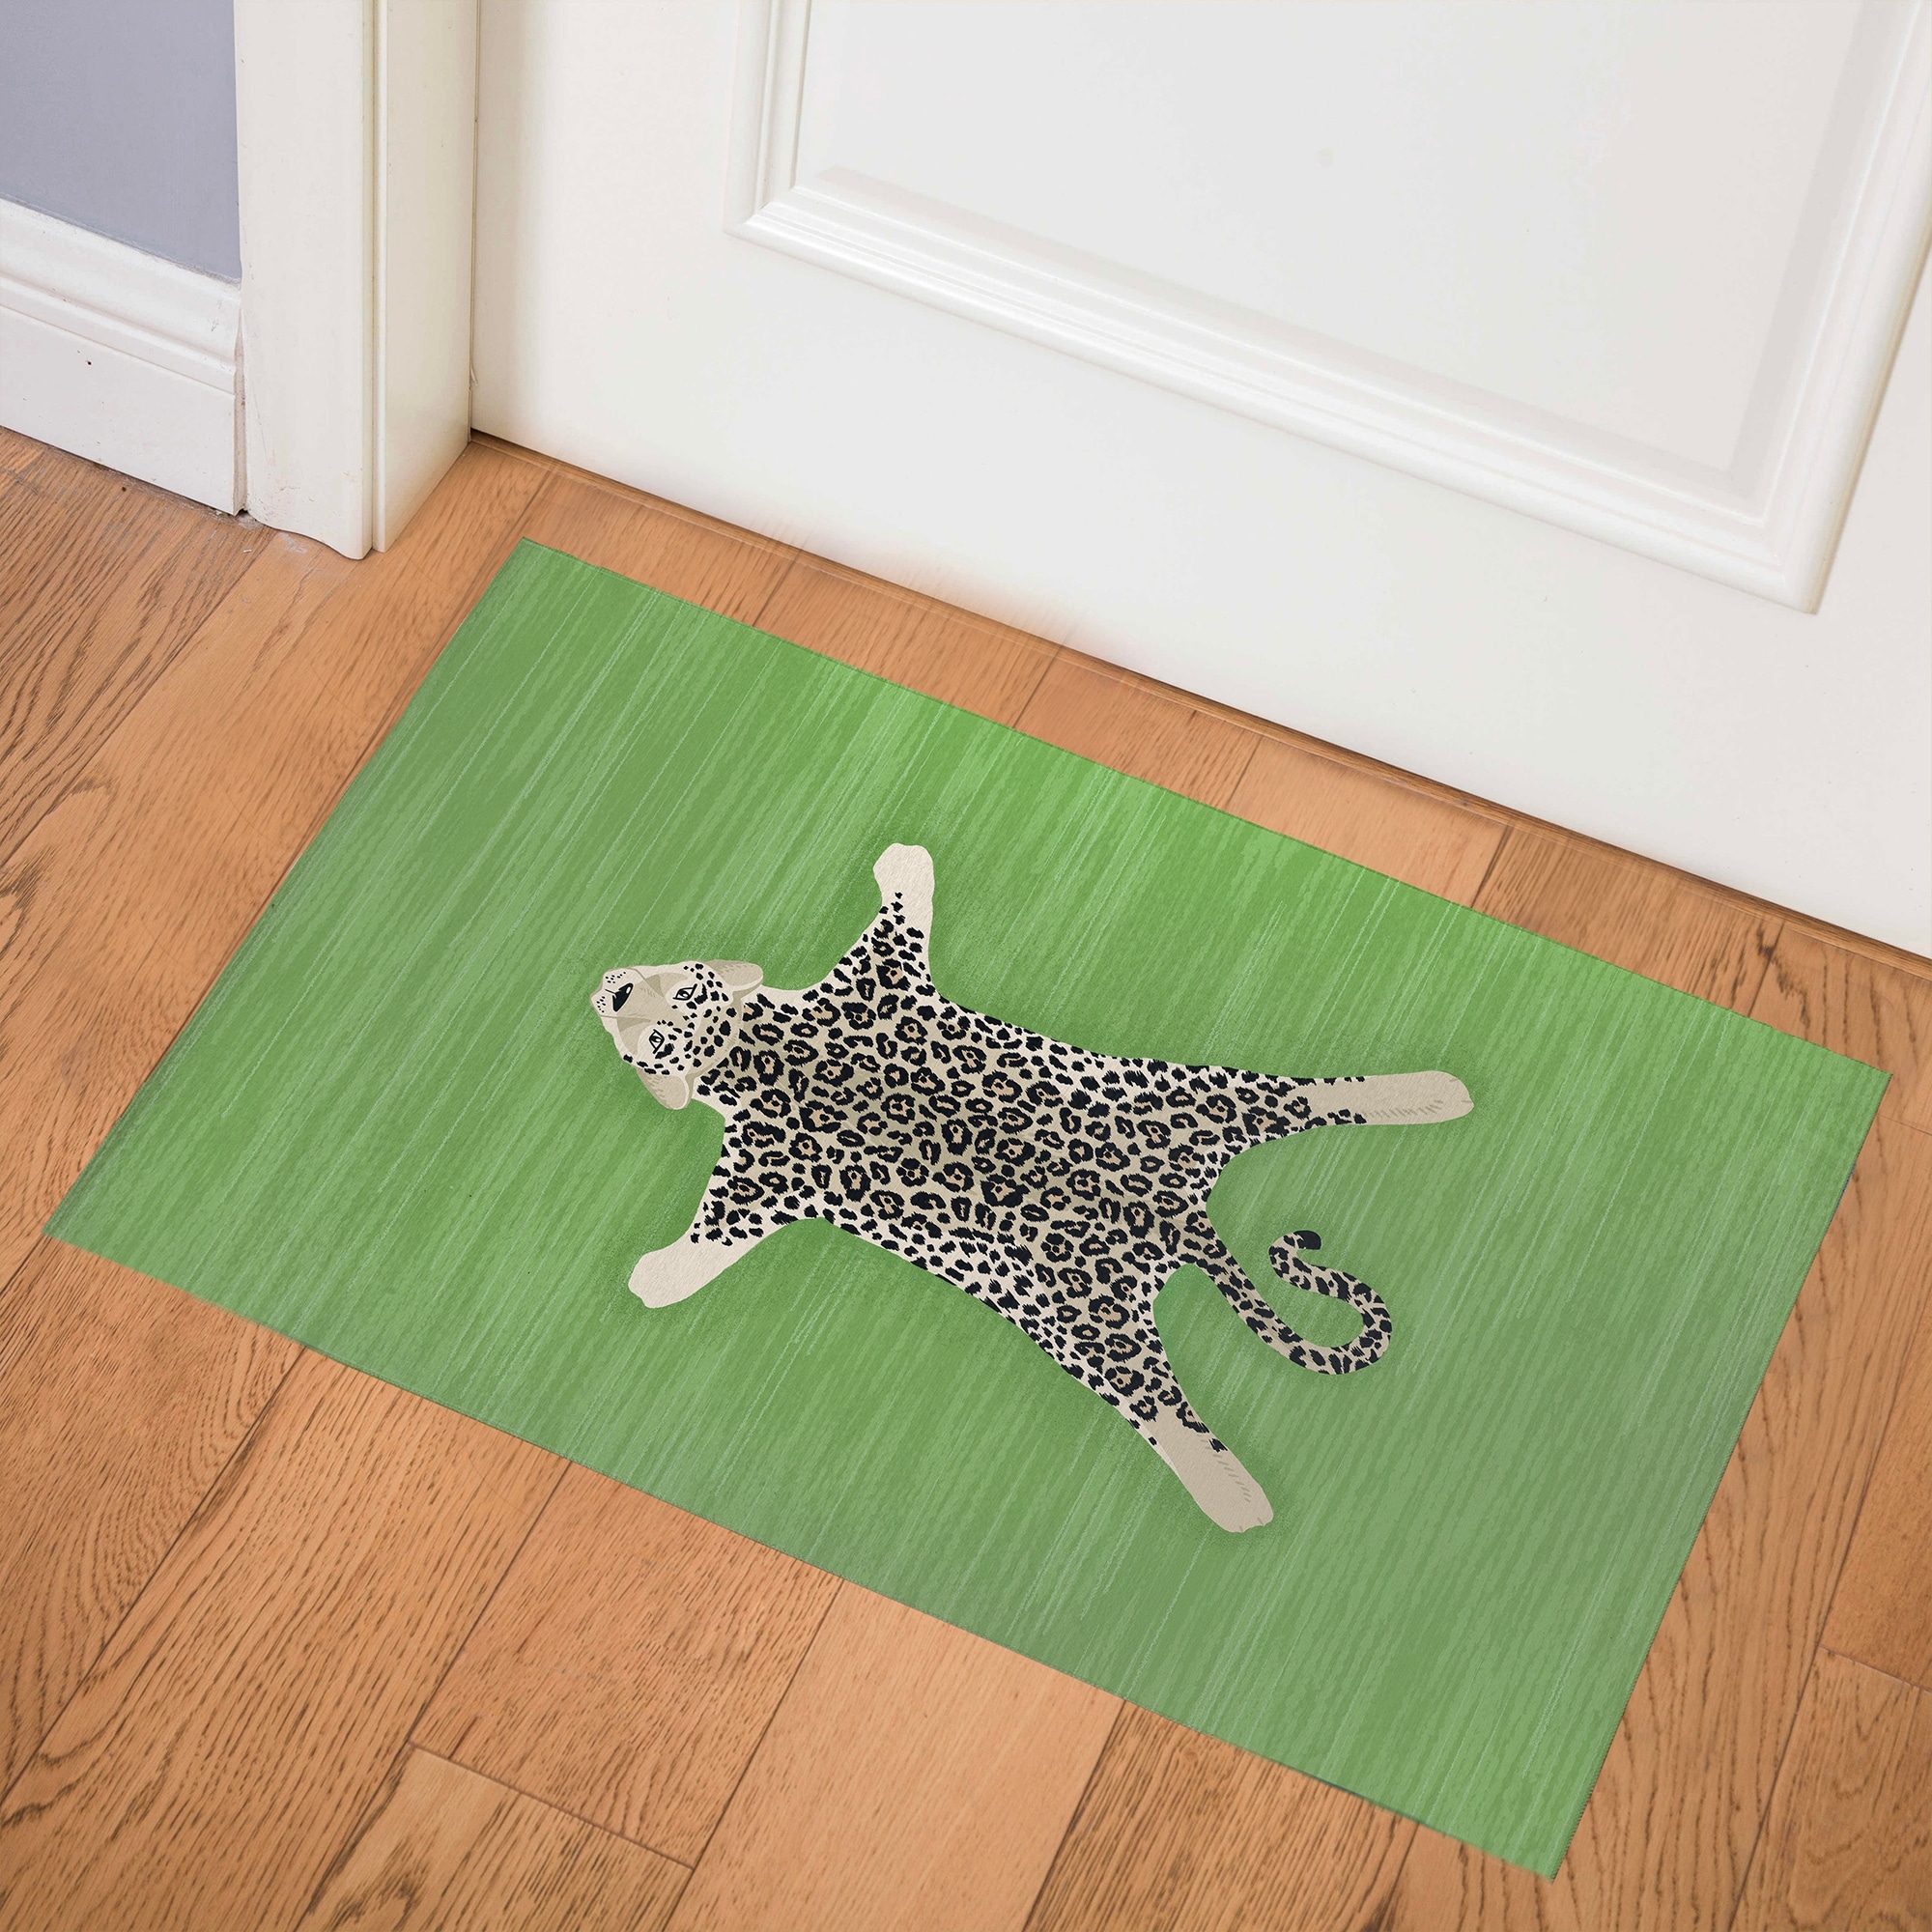 https://ak1.ostkcdn.com/images/products/is/images/direct/ea61d906ef5c21dc166f361ec87e905b824e75d5/SNOW-LEO-GREEN-Indoor-Floor-Mat-By-Kavka-Designs.jpg